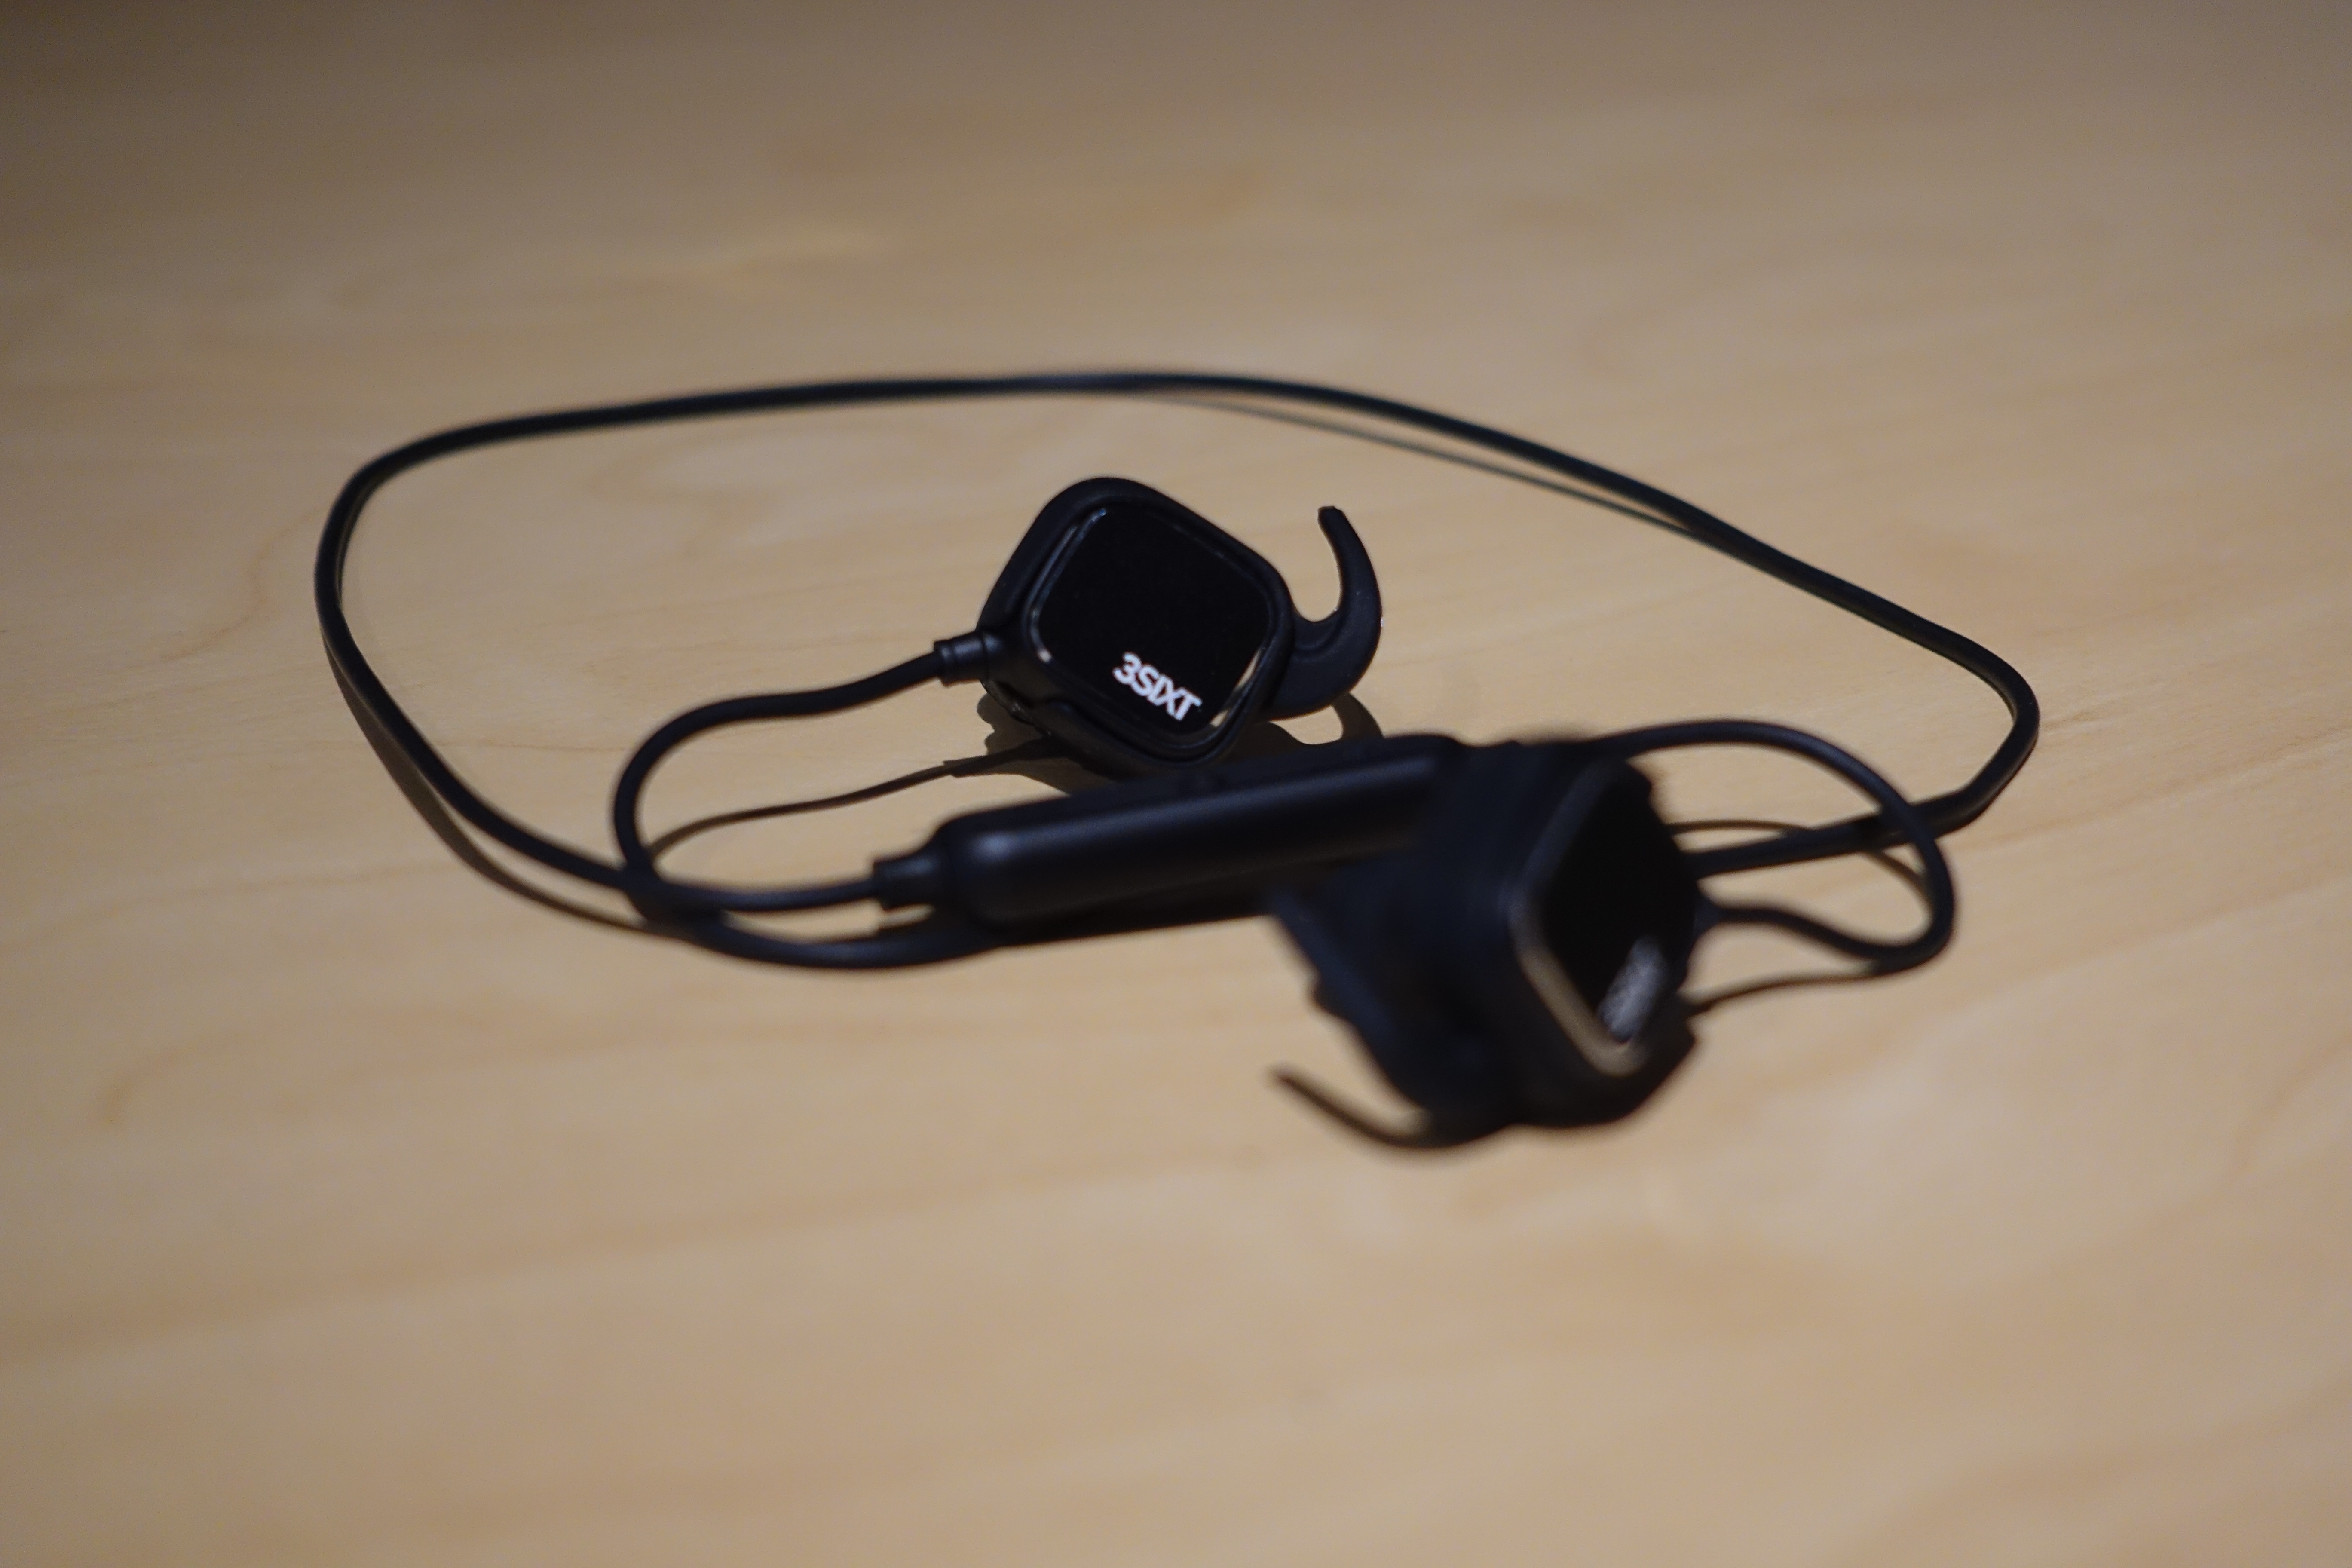 3sixt bluetooth earbuds